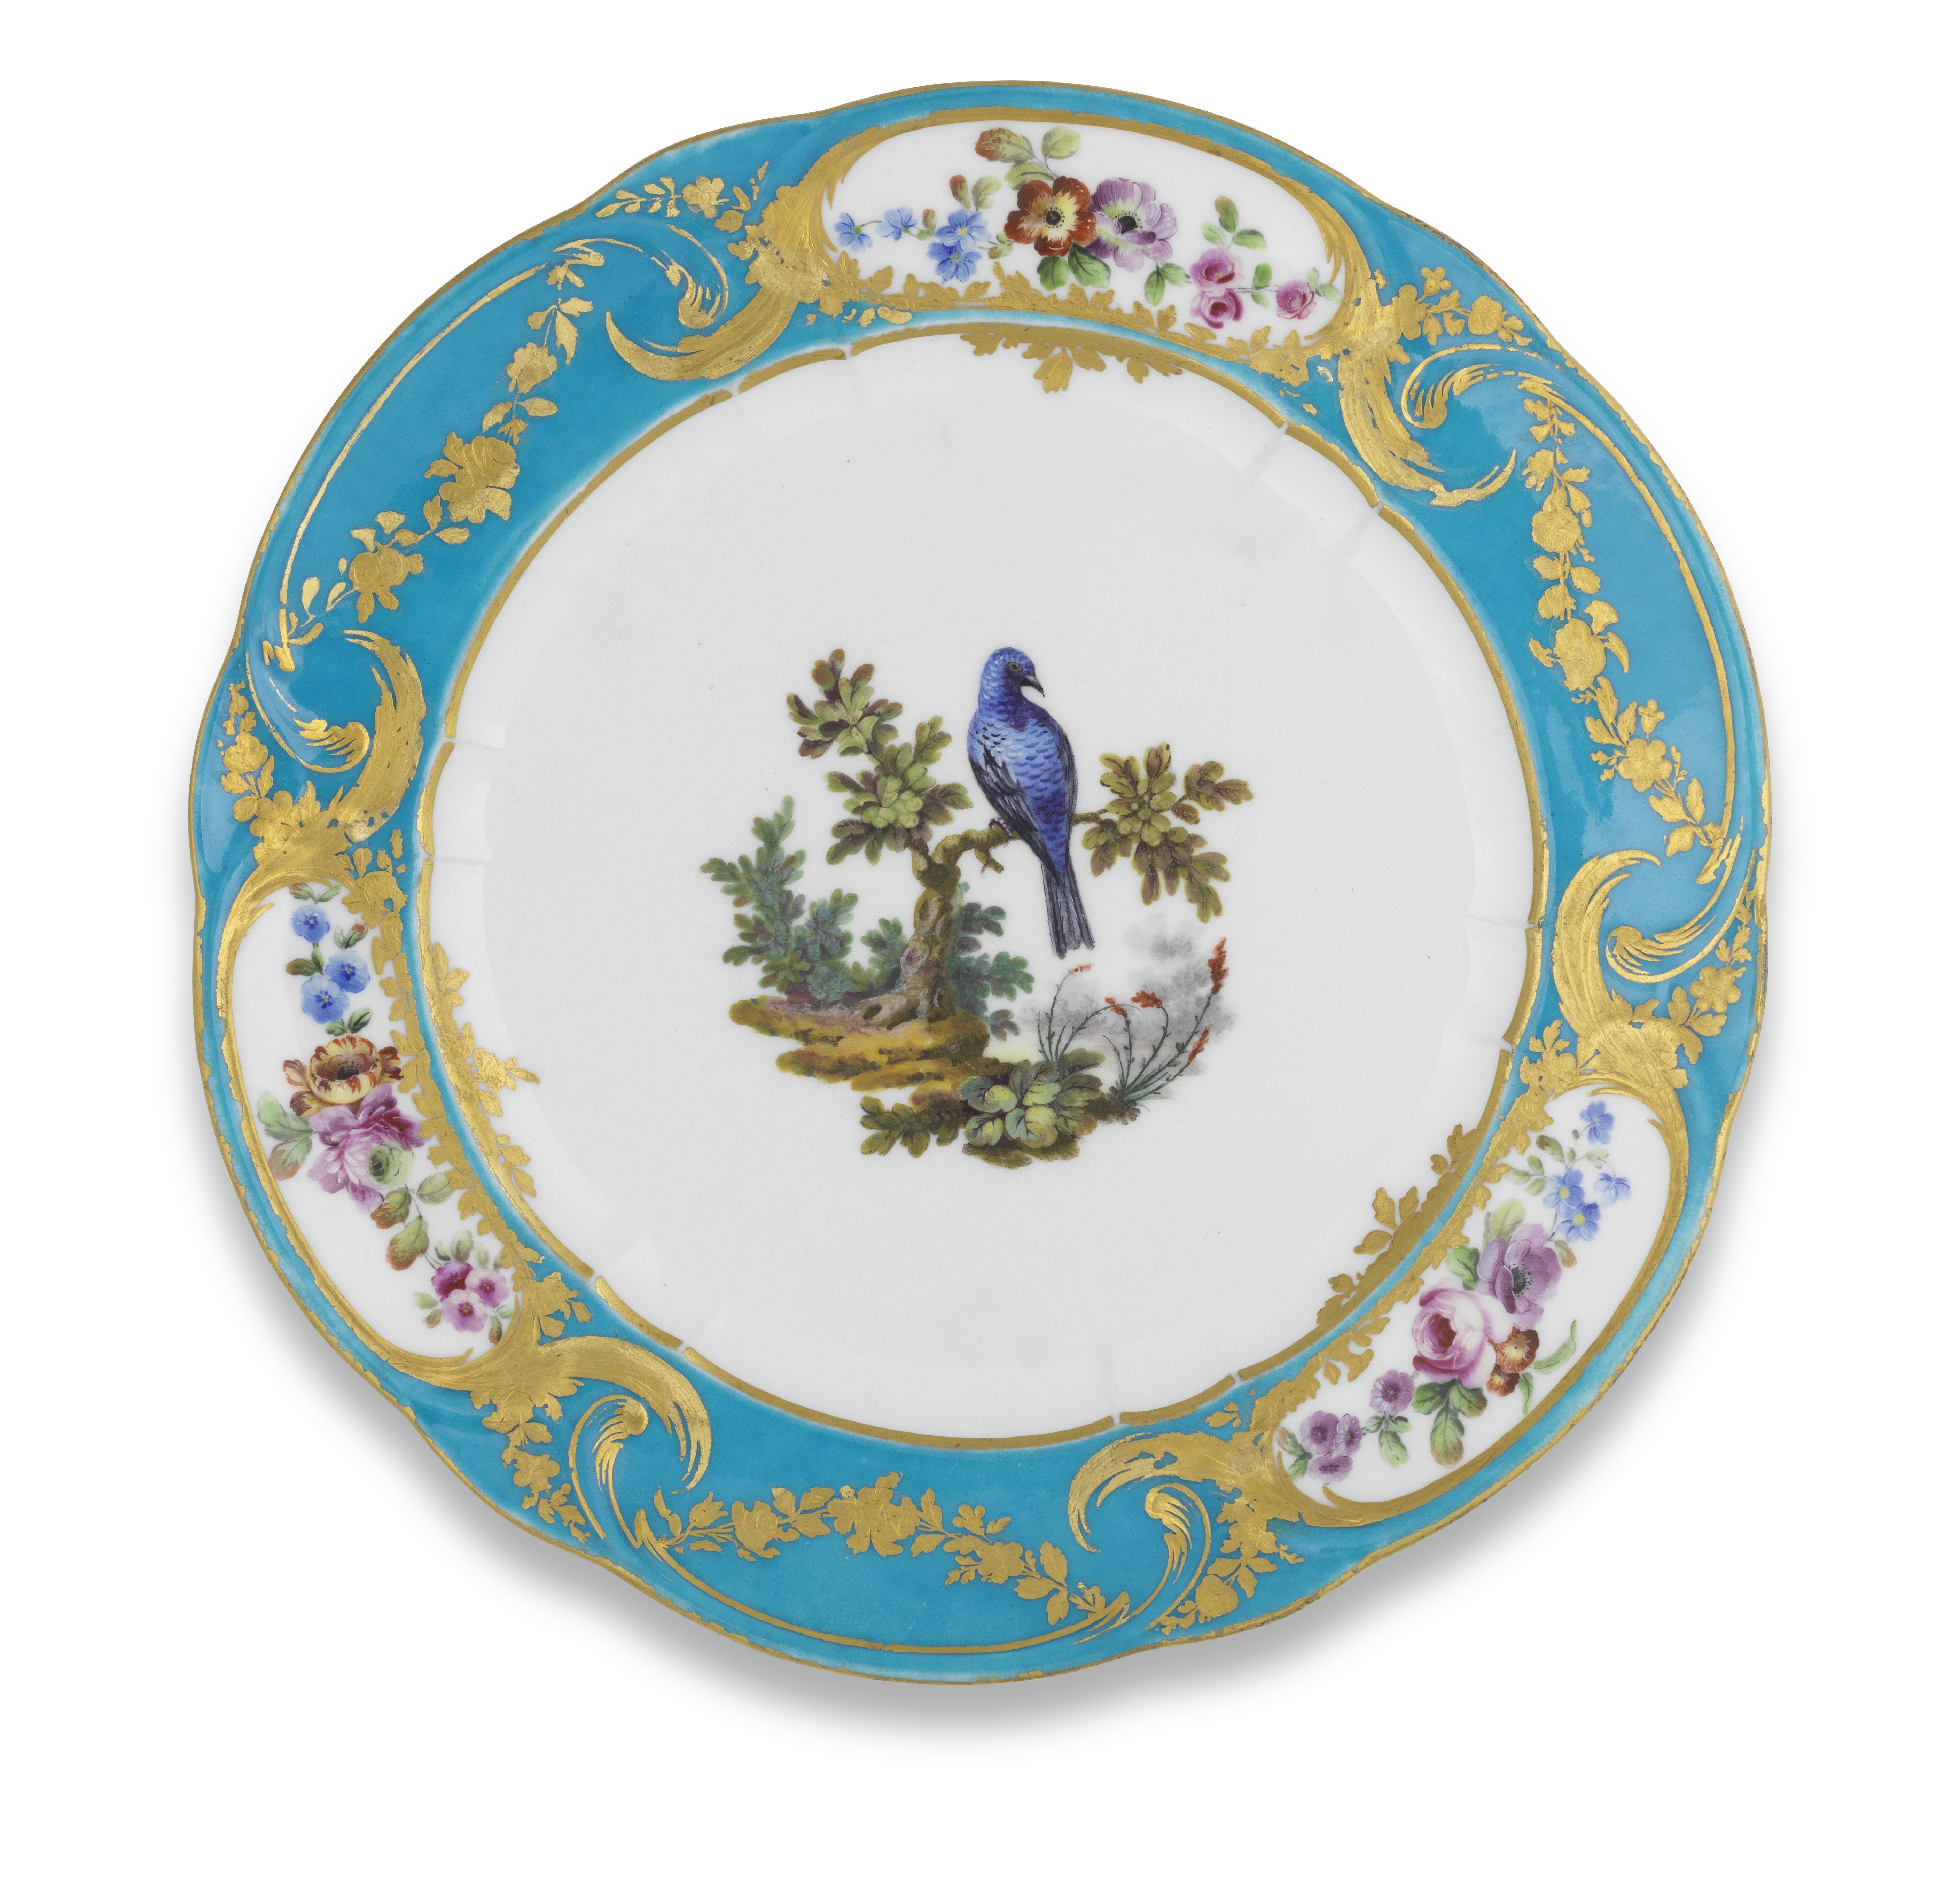 A S&#232;vres plate from the service for the baron de Breteuil, dated 1768